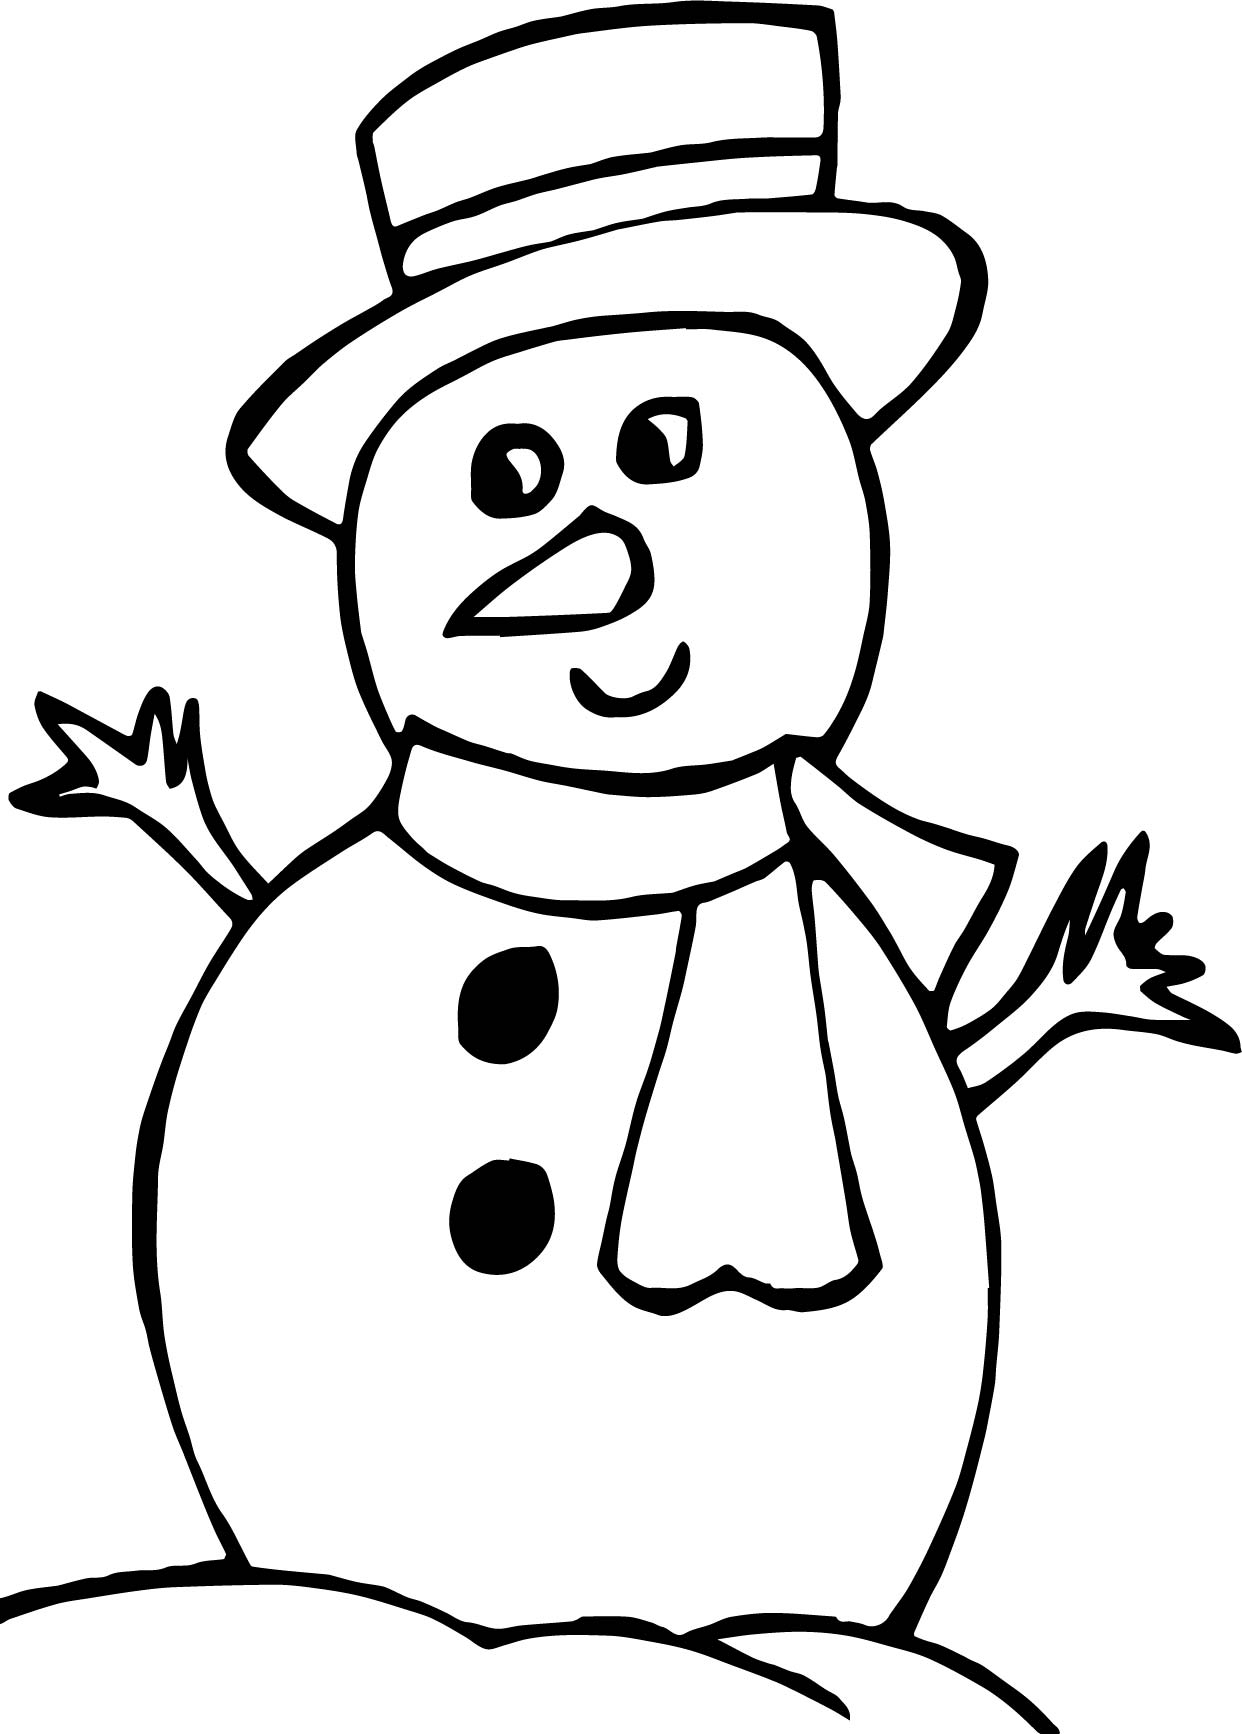 Winter Looking Snowman Coloring Page - Wecoloringpage.com